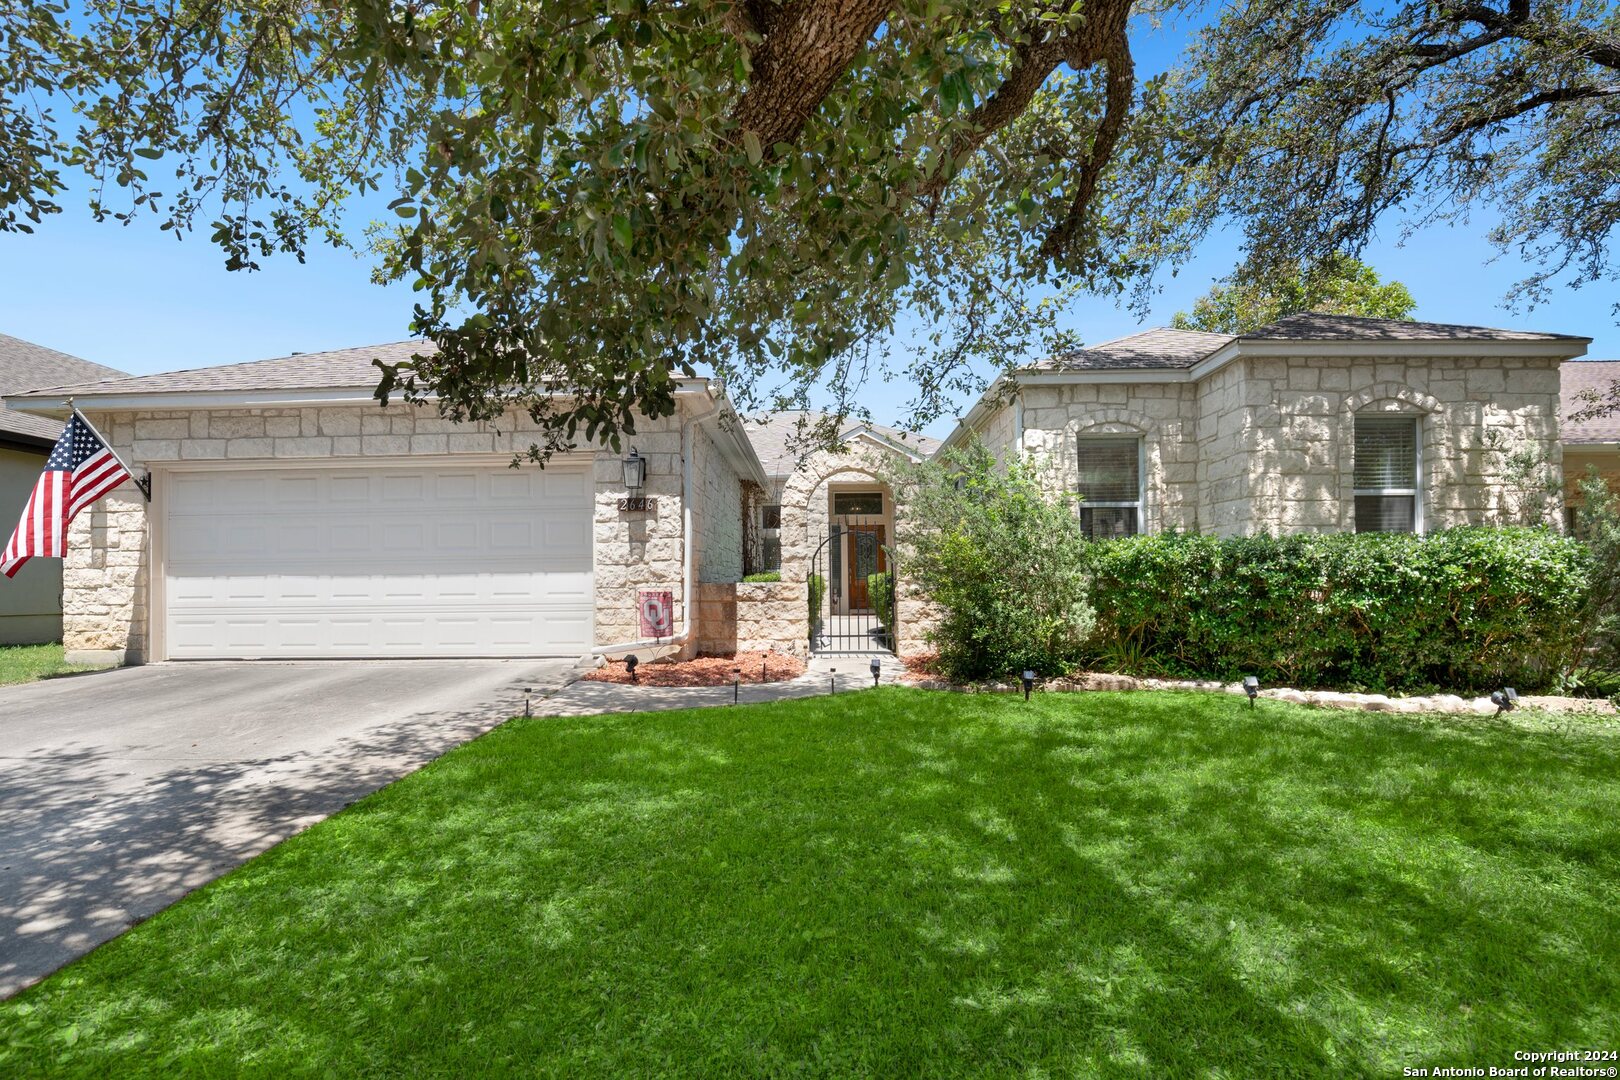 Photo of 2646 Fairwood Dr in New Braunfels, TX